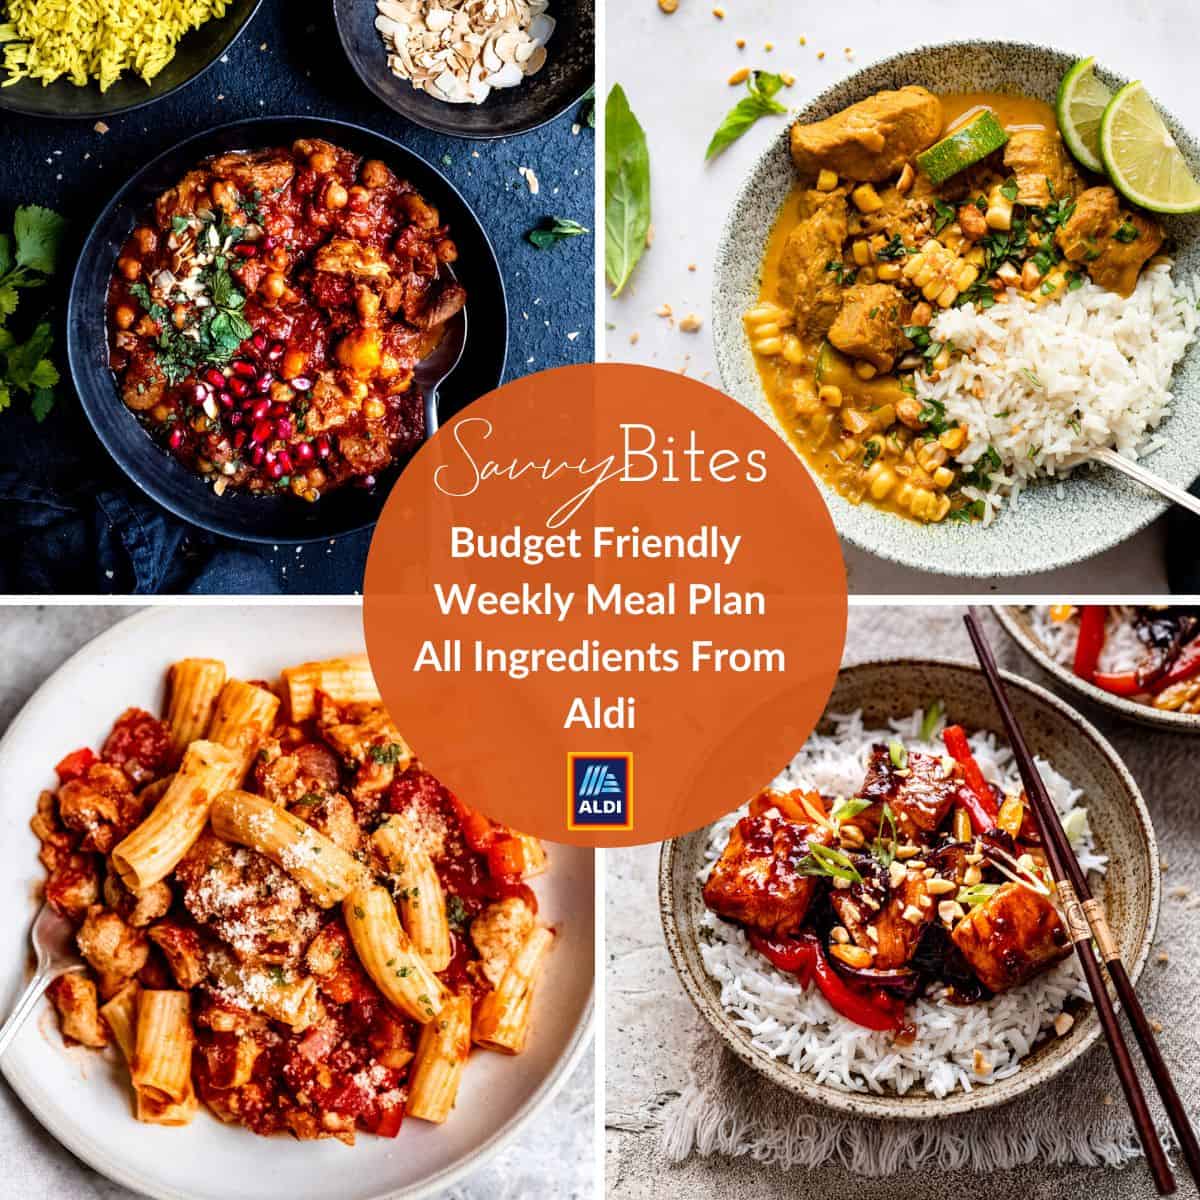 Aldi meal plan photo collage.